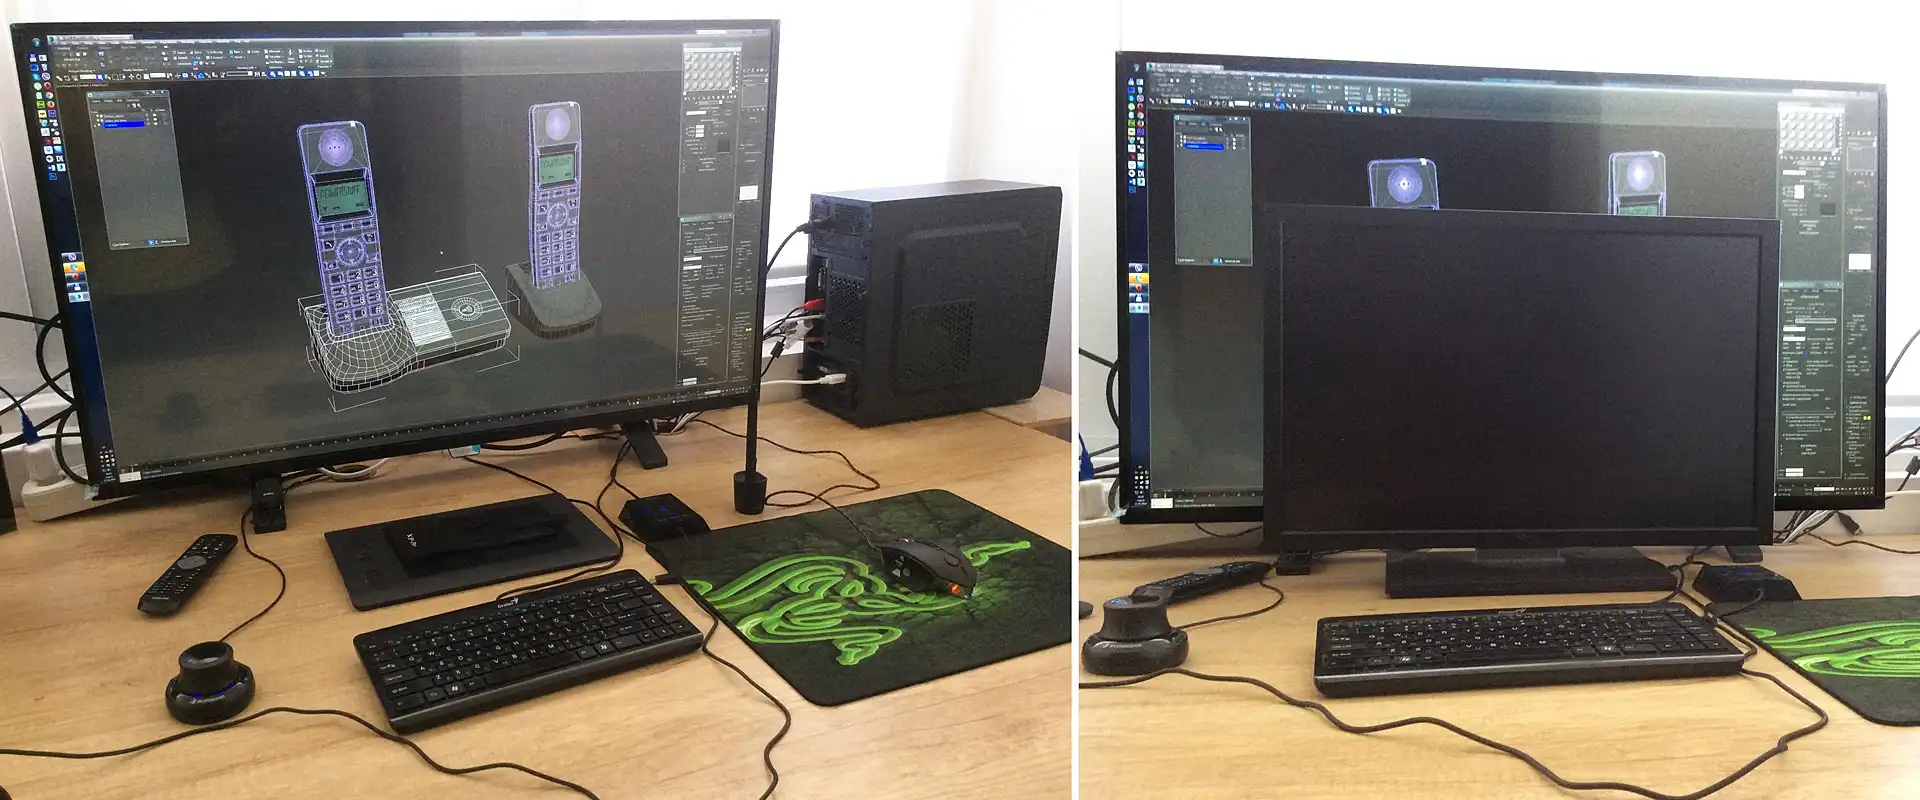 A typical workplace for a graphic designer and 3D artist with a 43" large-screen TV compared to a regular 24" monitor.